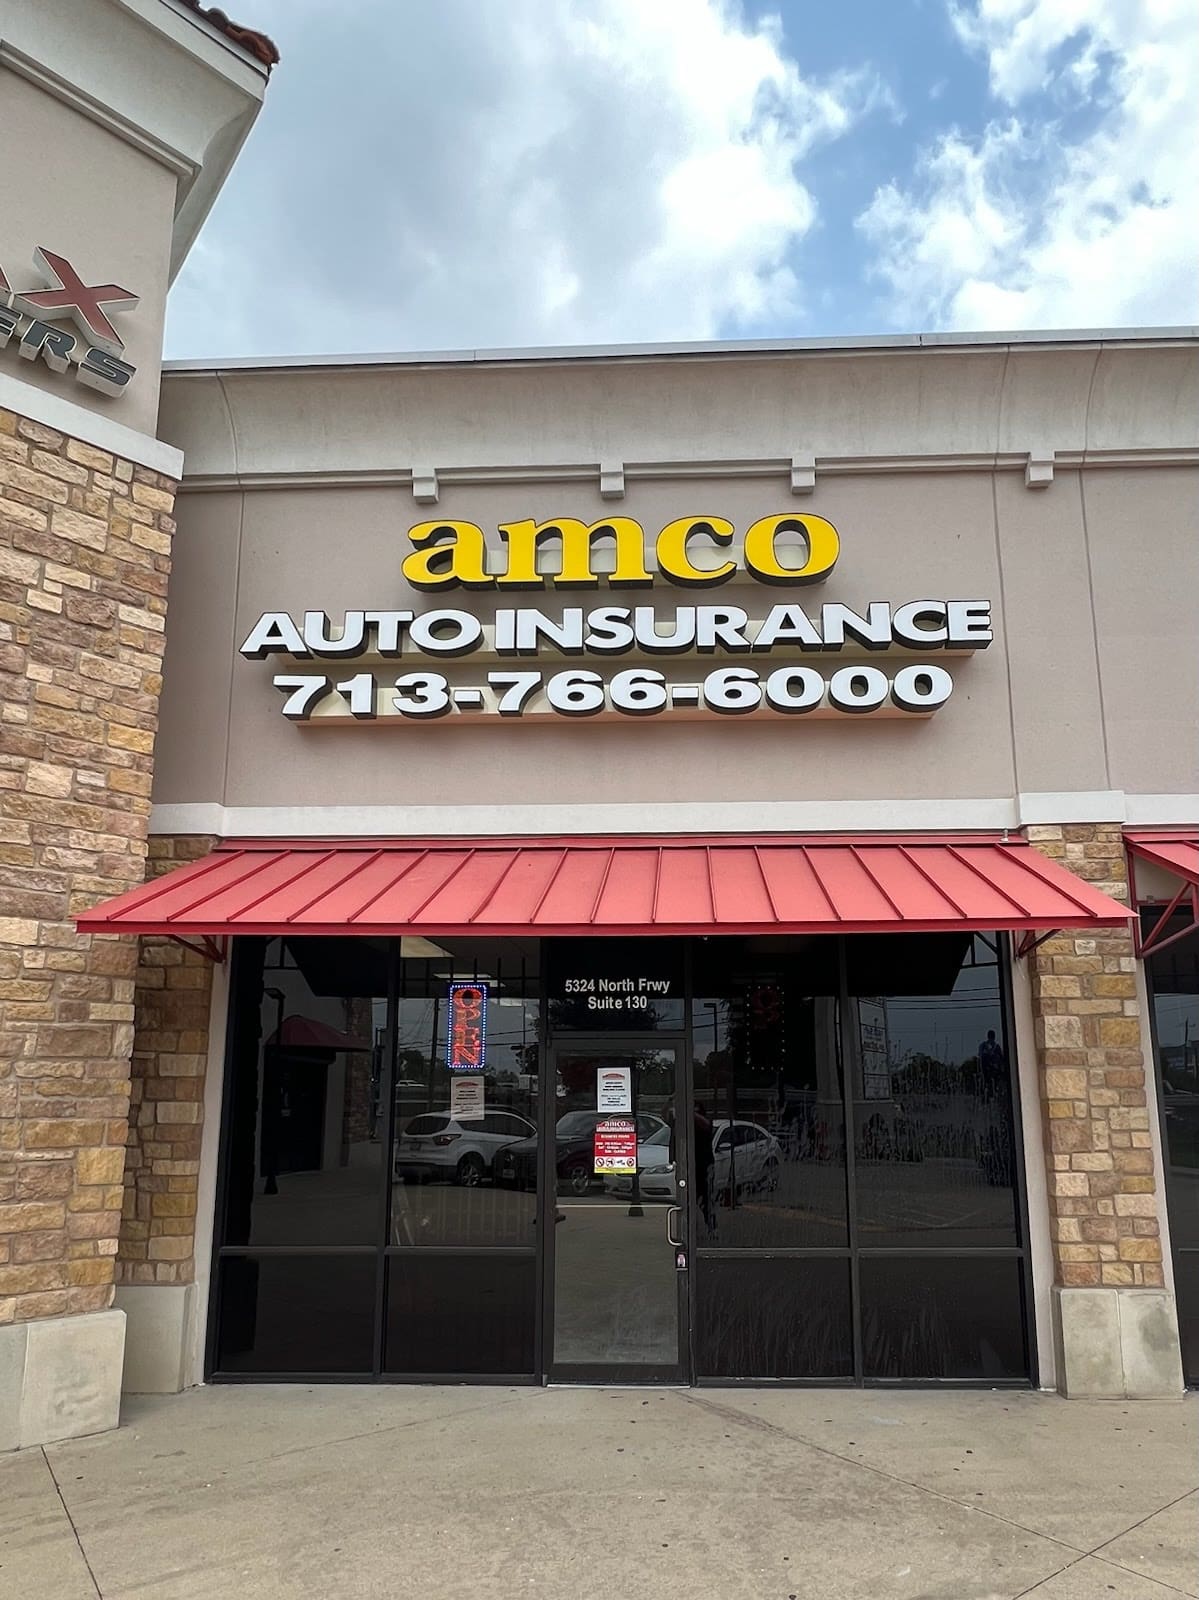 Image of Amco Auto Insurance – North Fwy